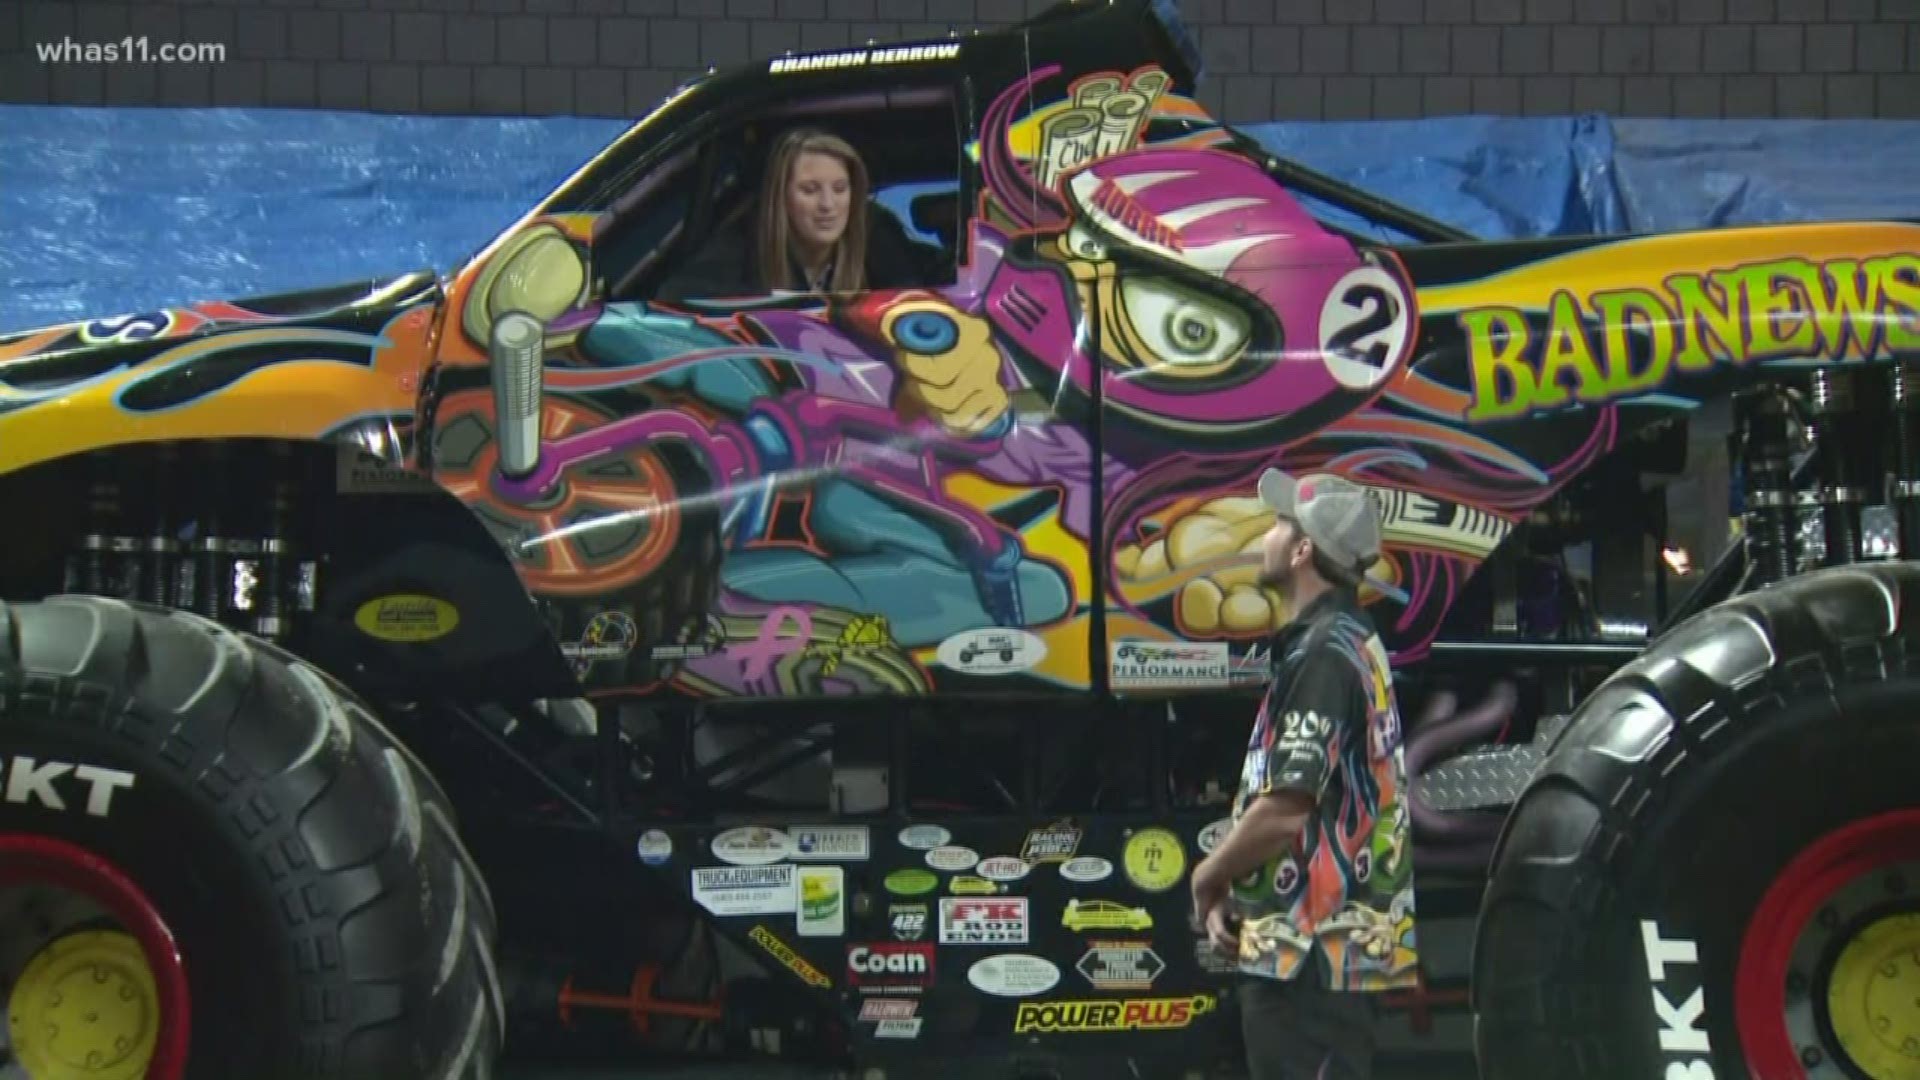 The Monster Jam trucks are back in Louisville again this weekend at Freedom Hall.